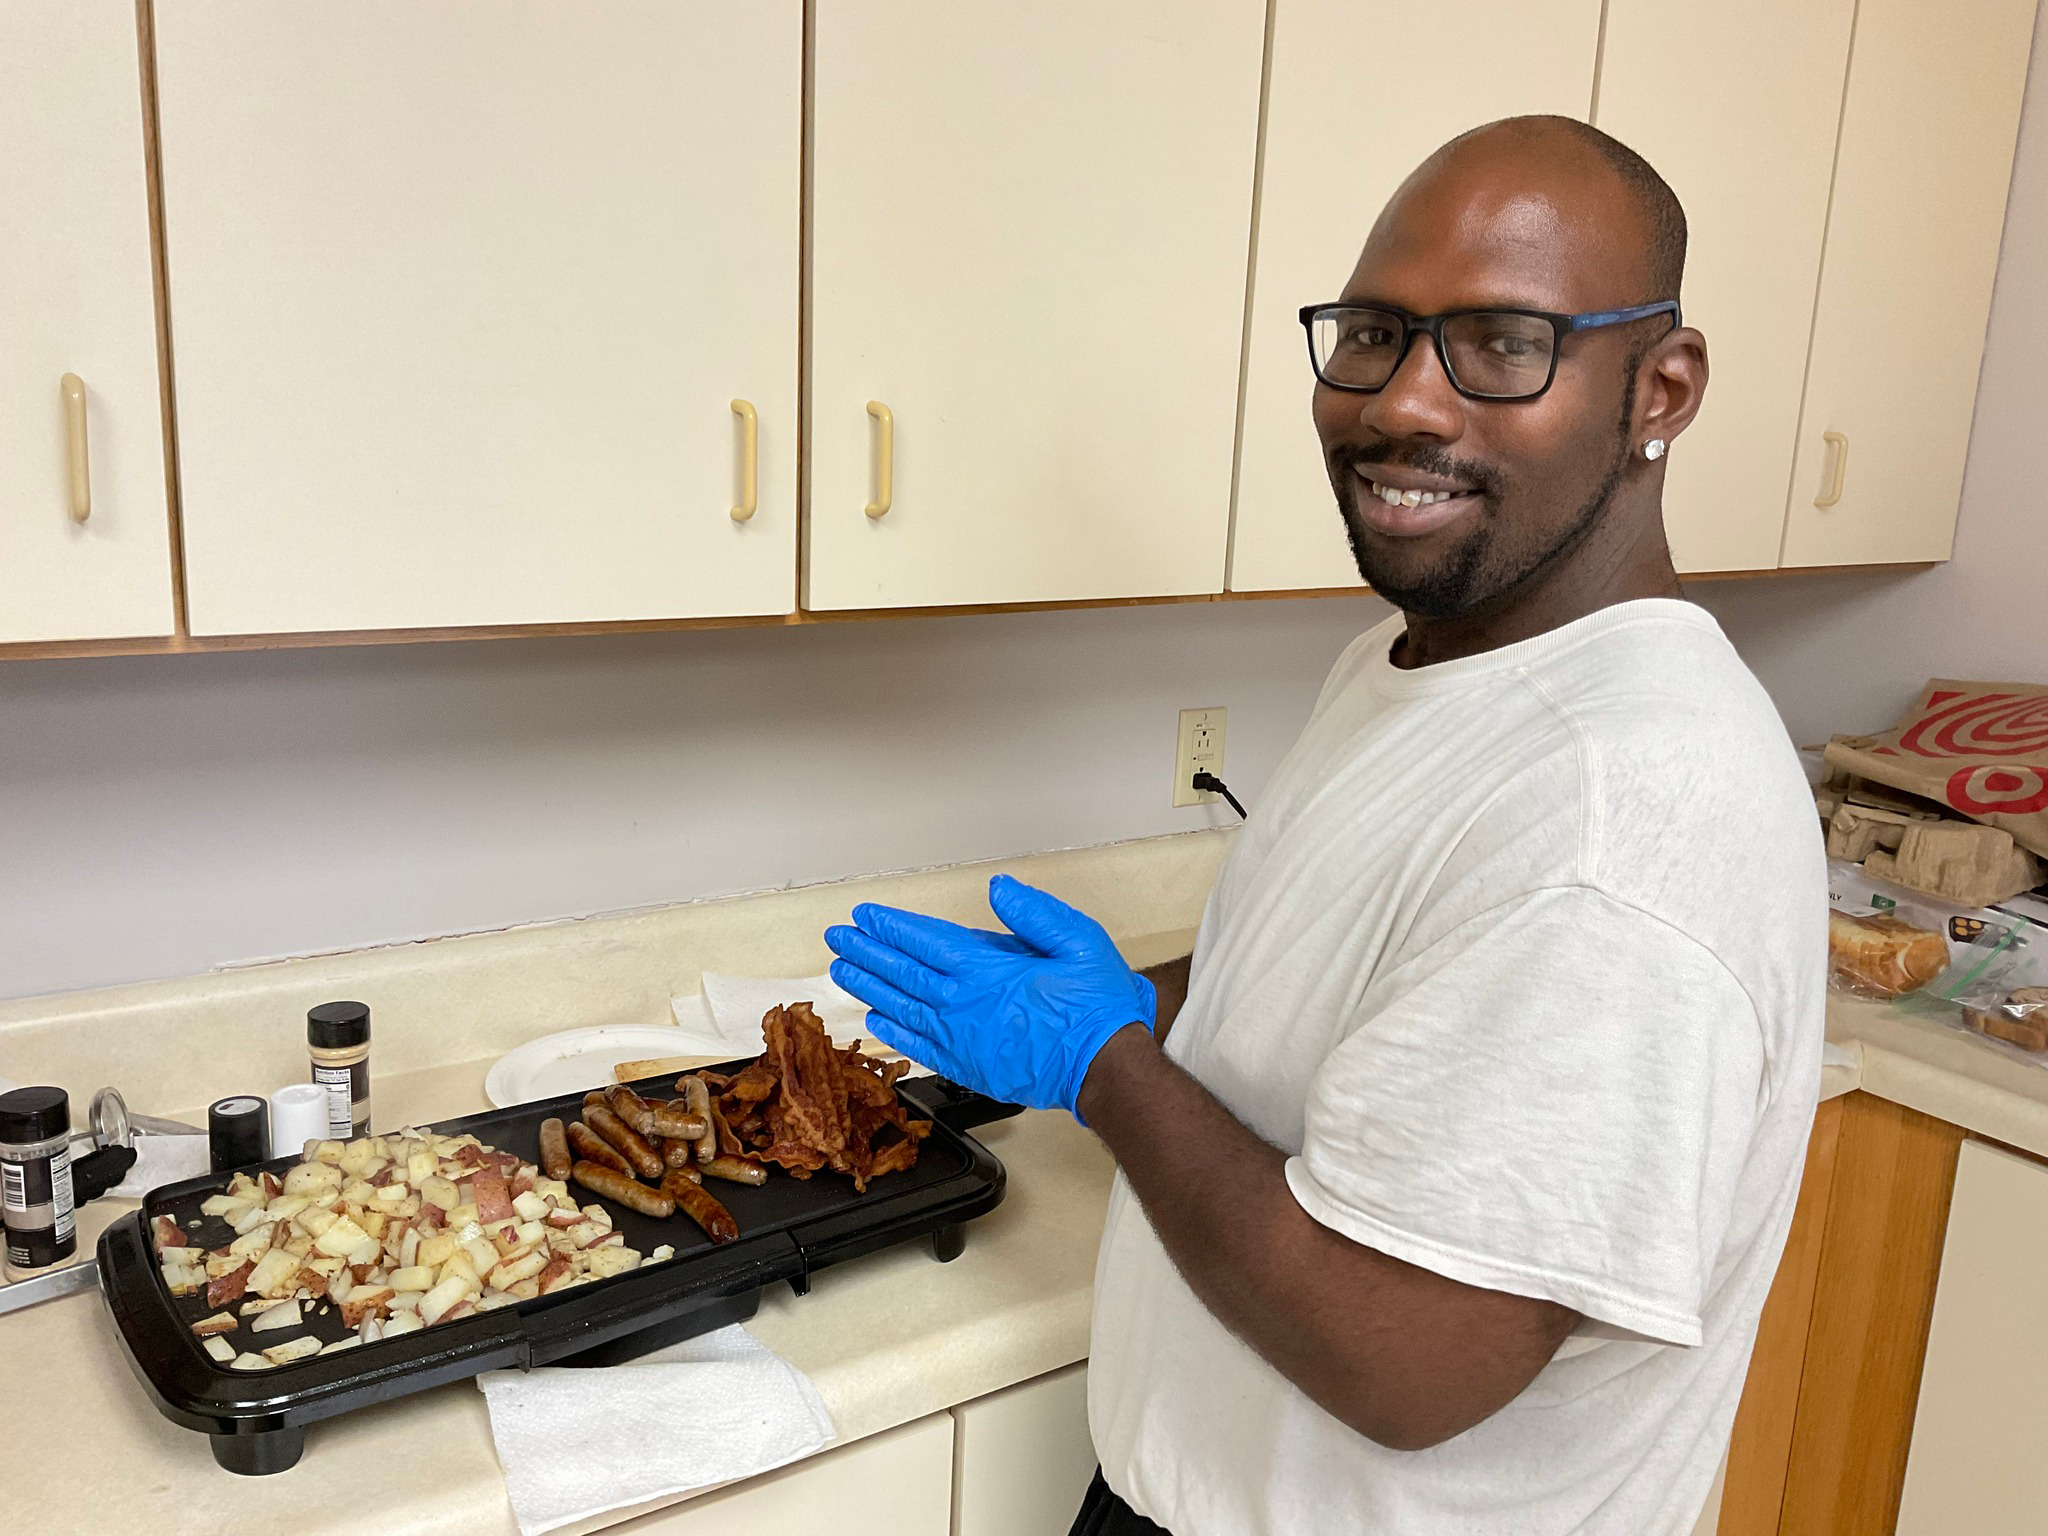 Photo of UES program participant Kayson cooking sausage and potatoes on a griddle